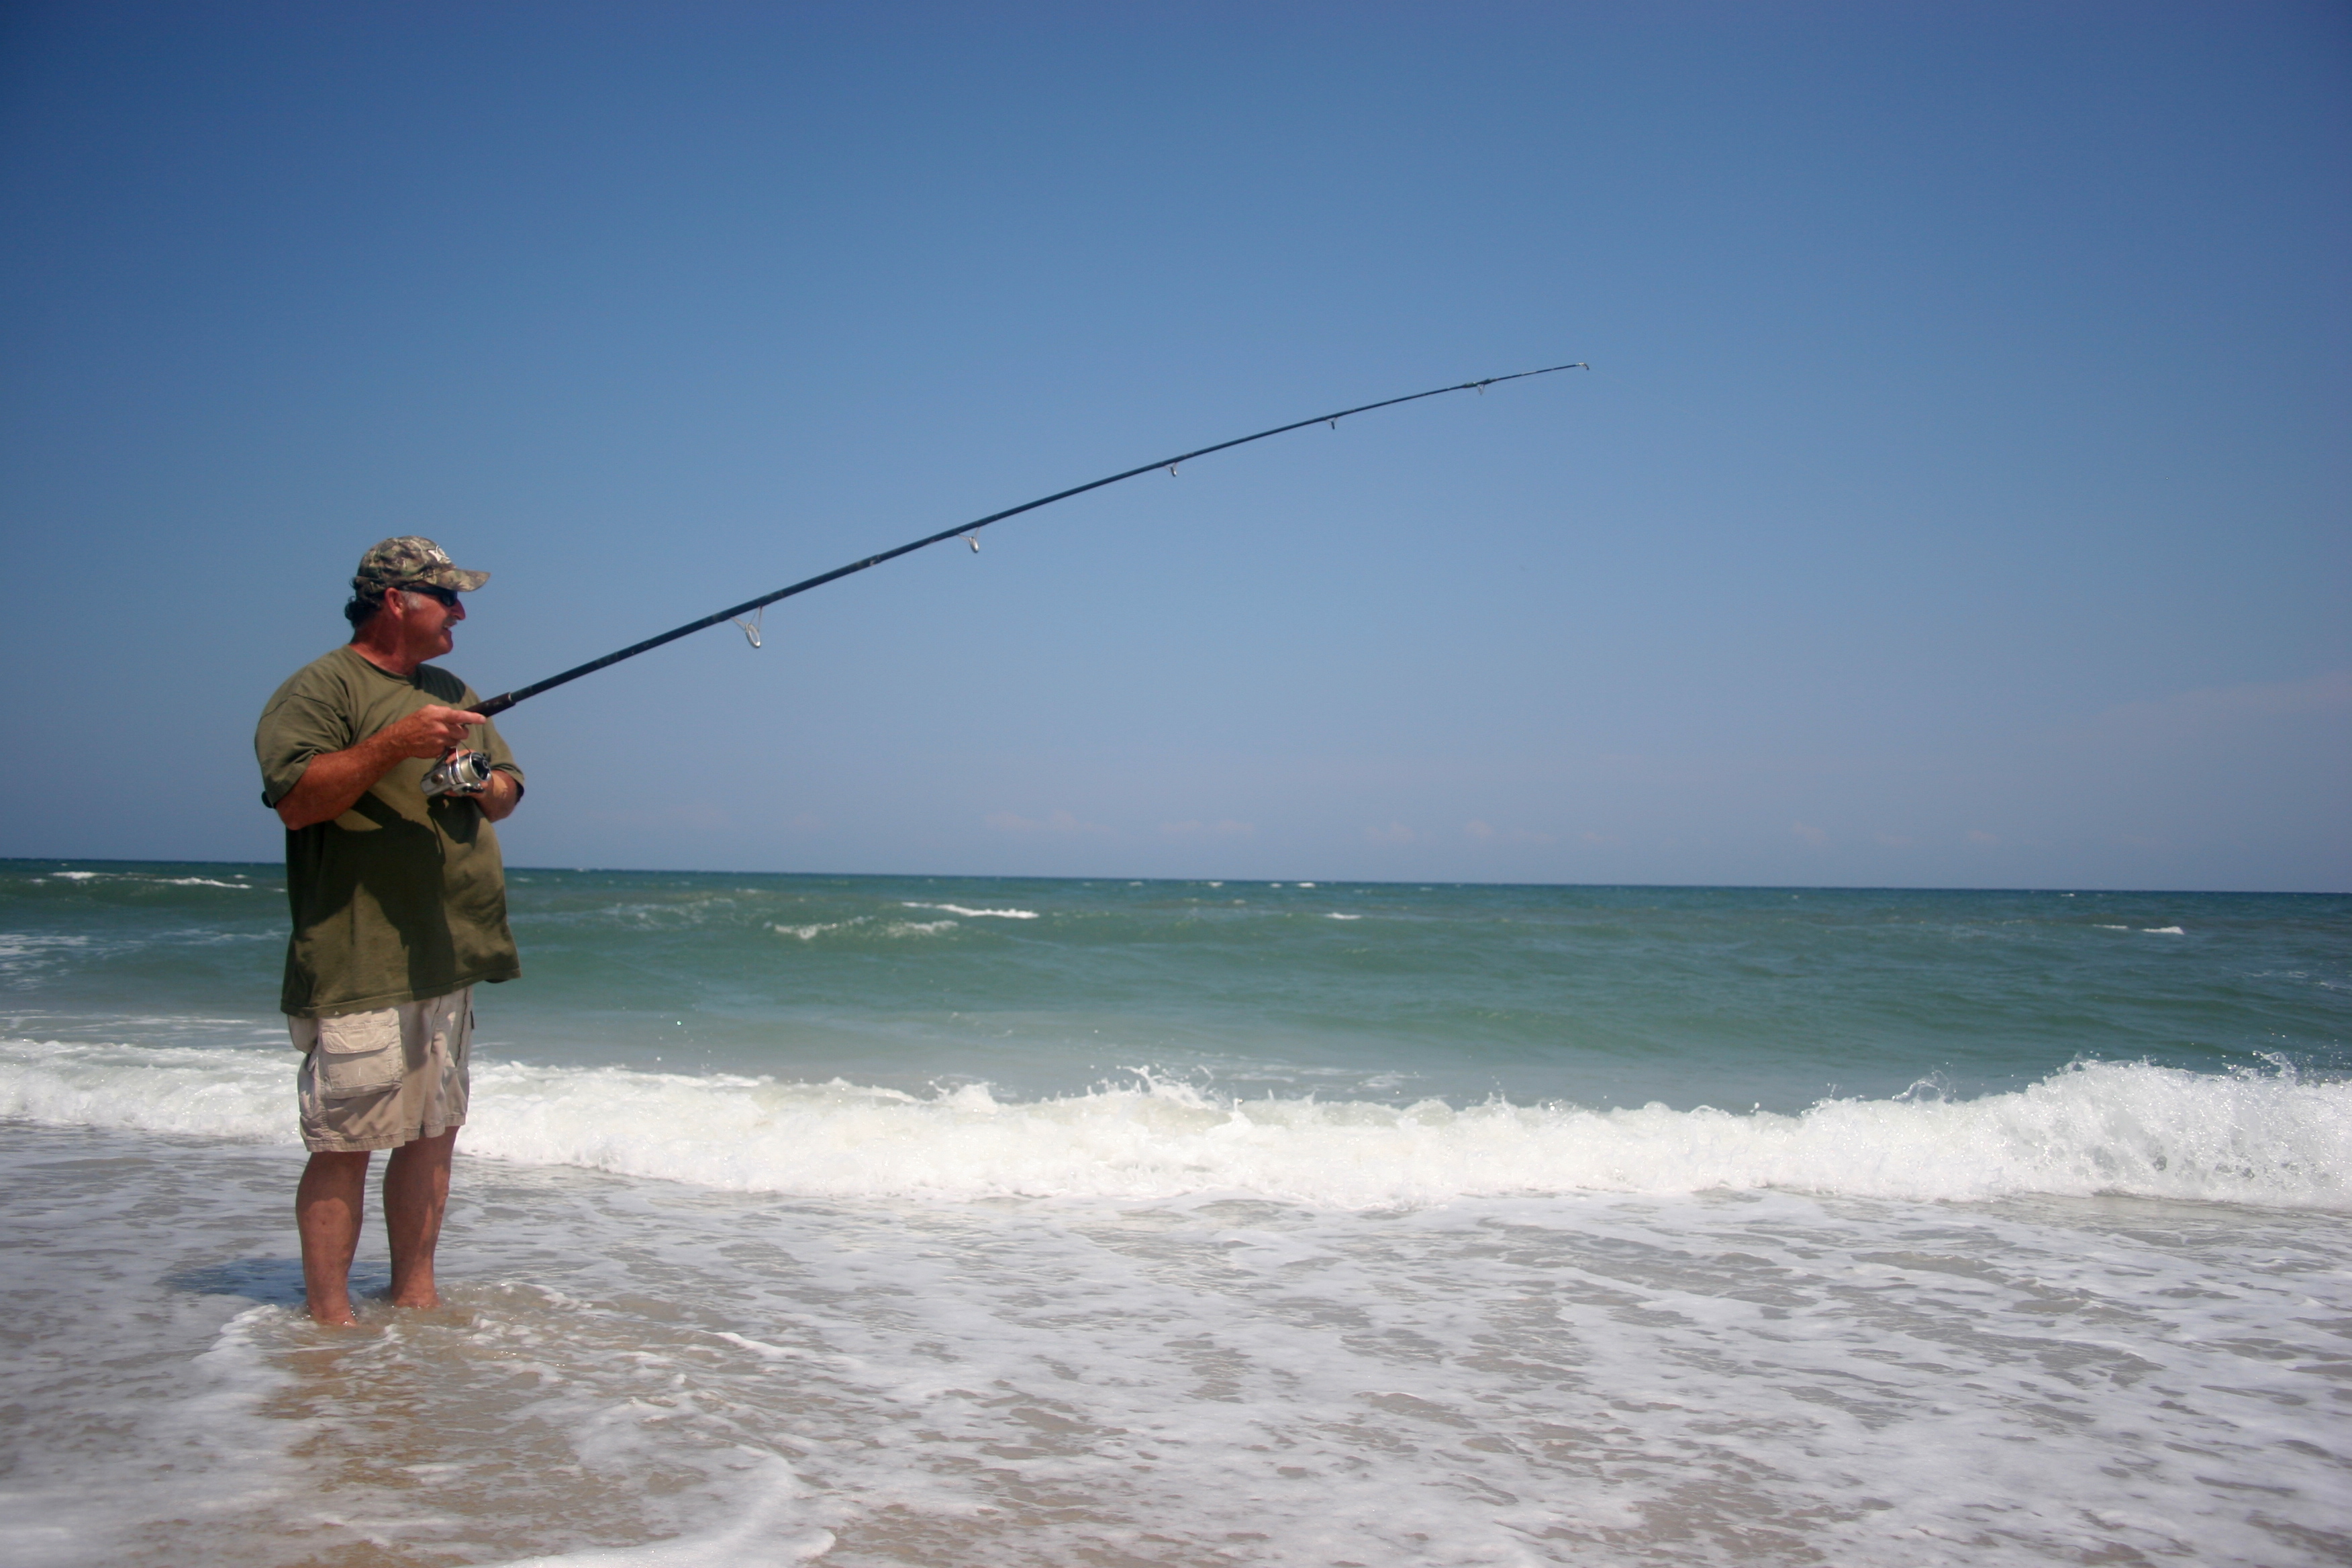 A surf fisherman stands in the water holding his surf rod and watching the waves